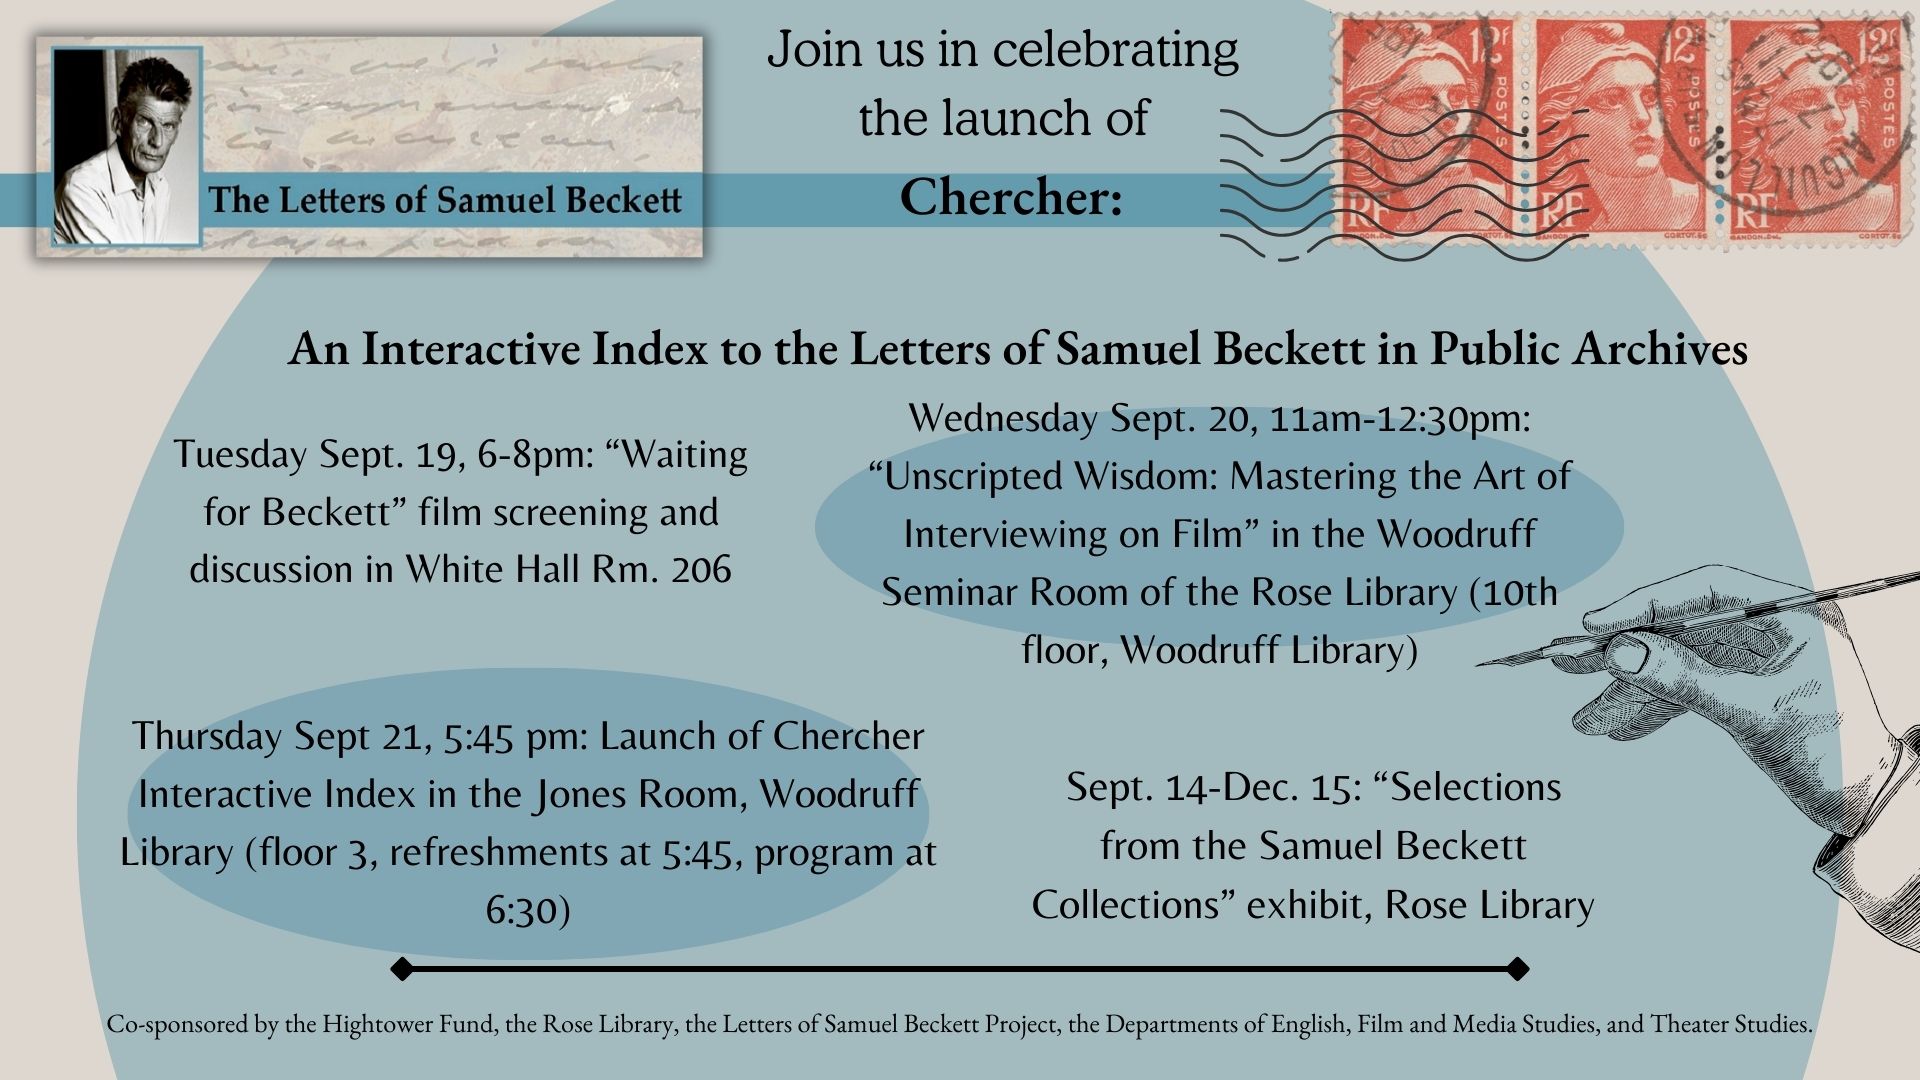 Join-us-in-celebrating-the-launch-of-Chercher-An-Interactive-Index-to-the-Letters-of-Samuel-Beckett-in-Public-Archives.jpg